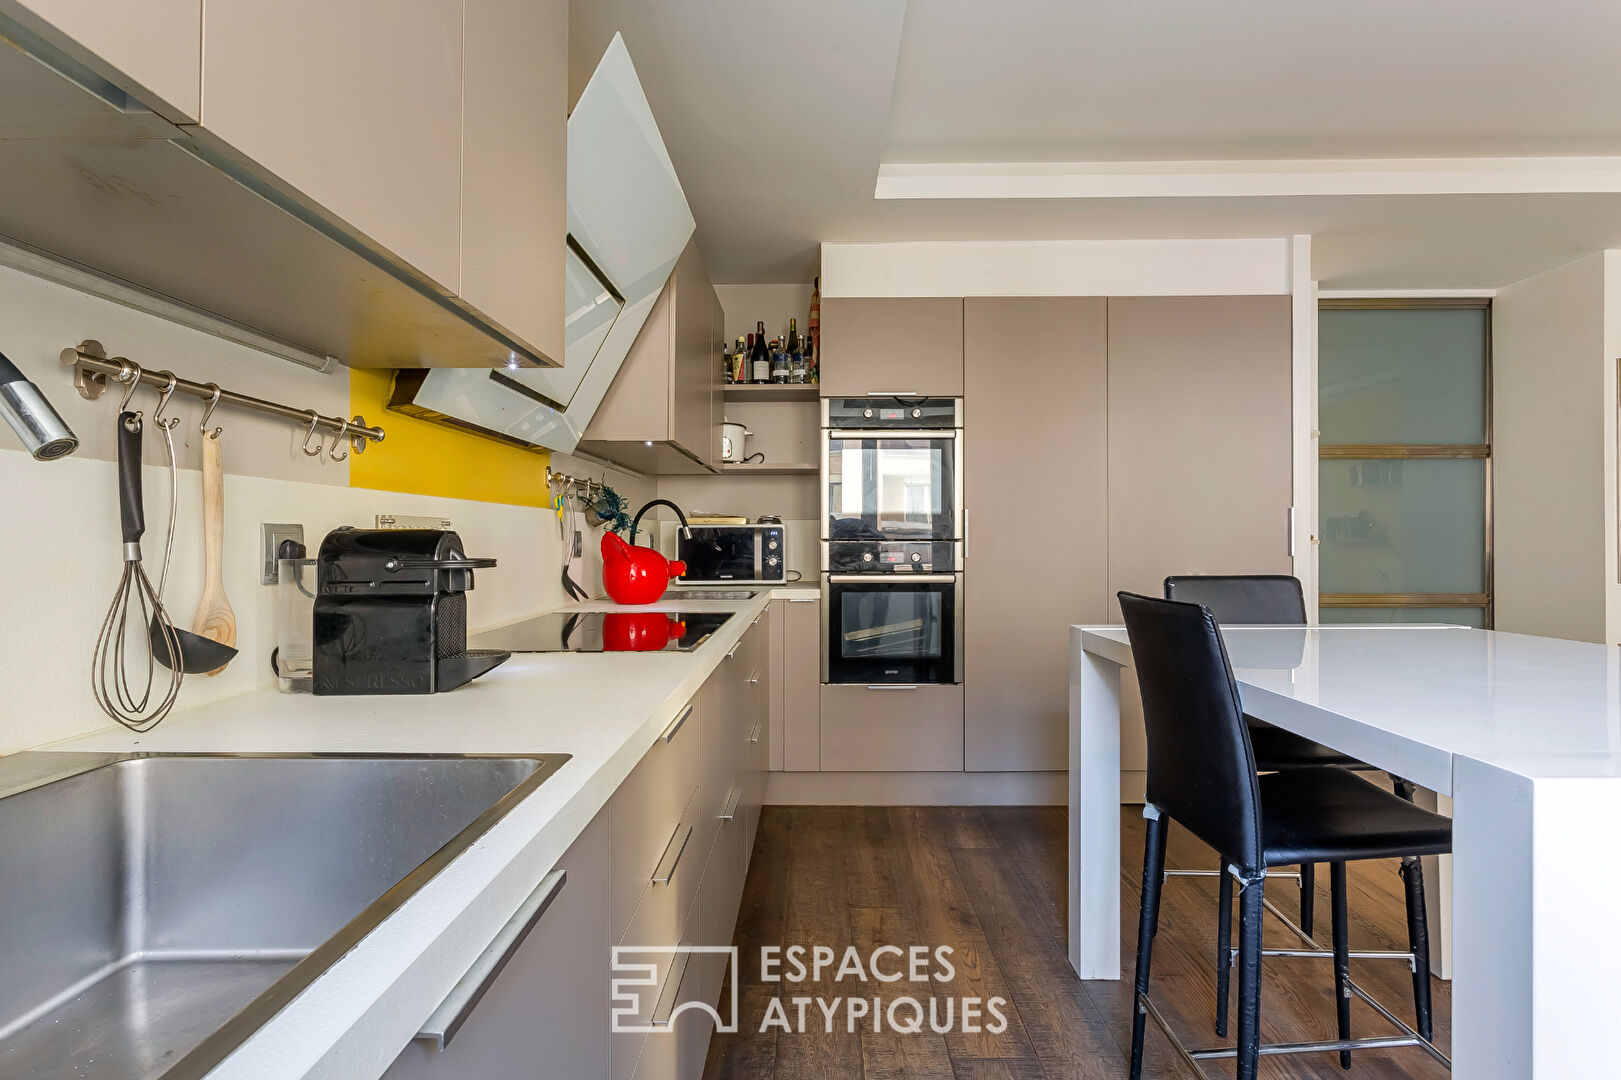 Renovated apartment near Tete d’Or park